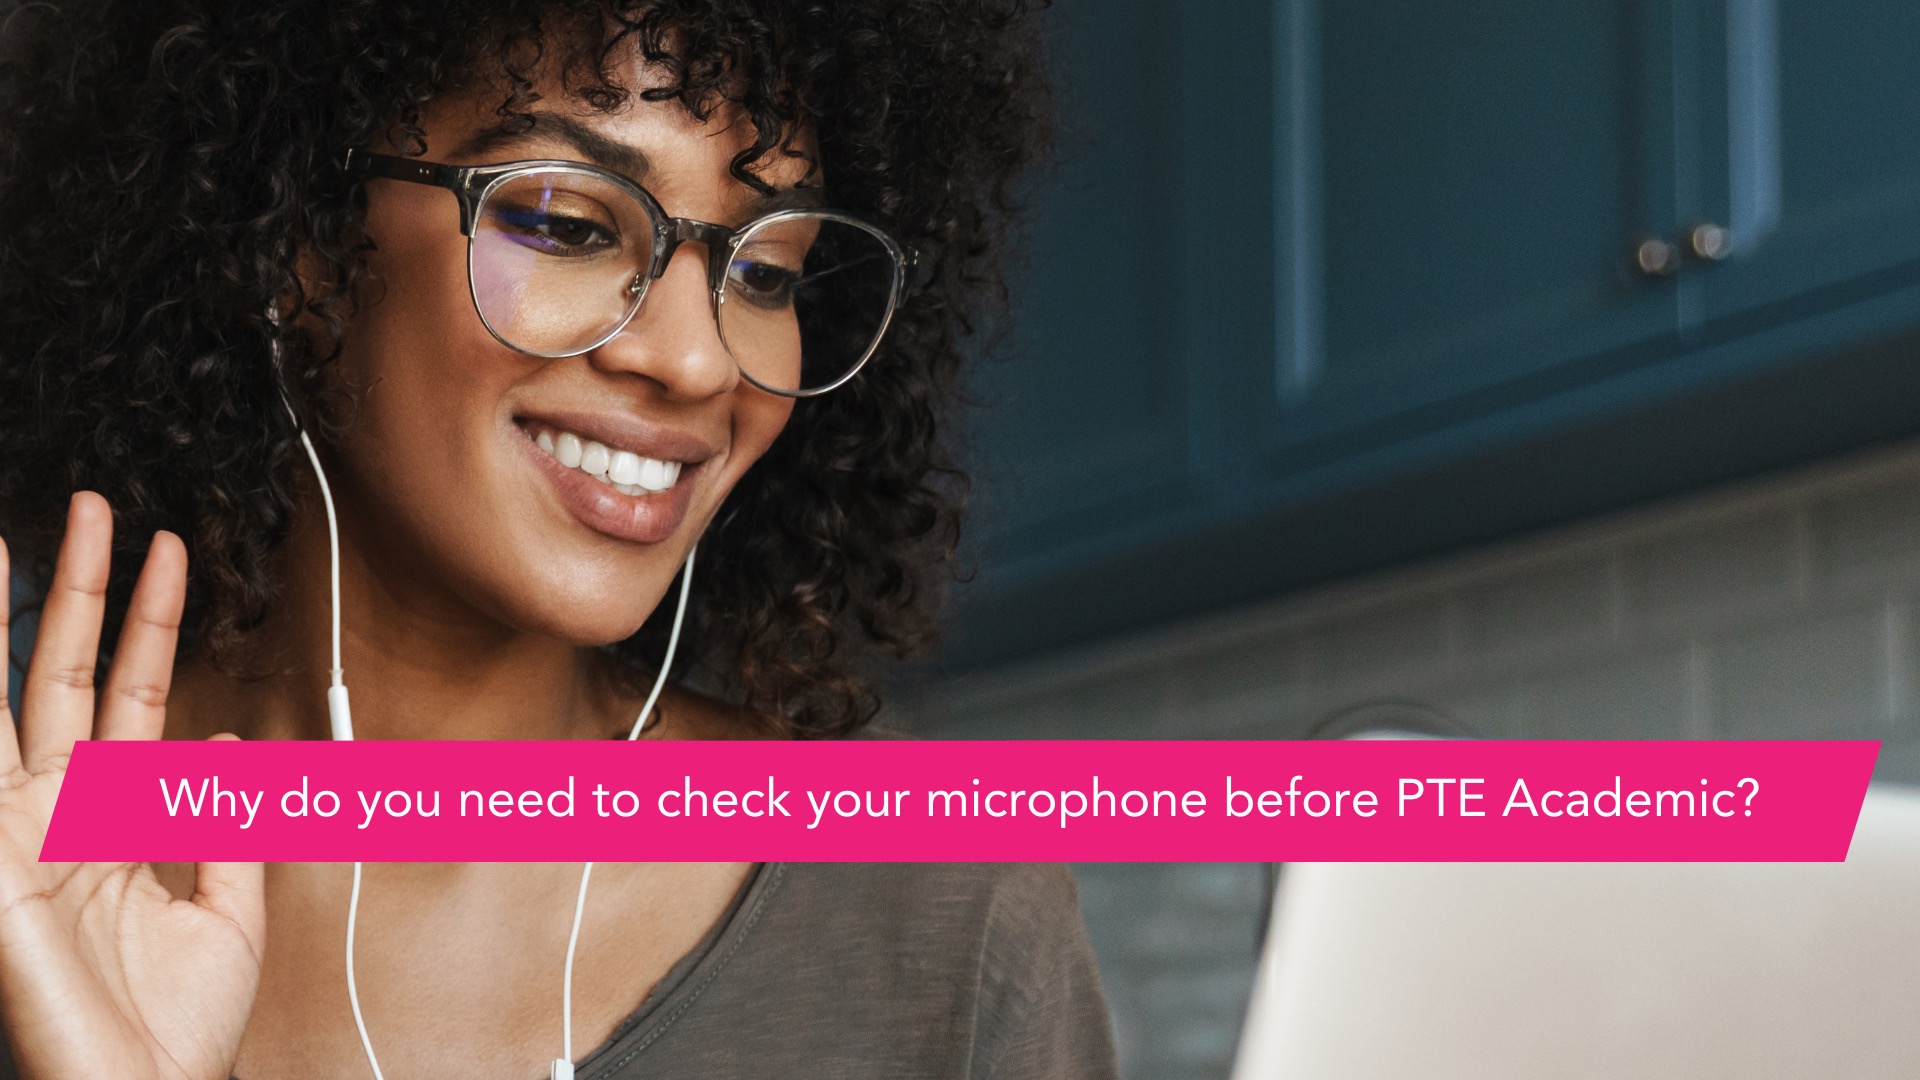 Why do you need to check your microphone before PTE Academic?